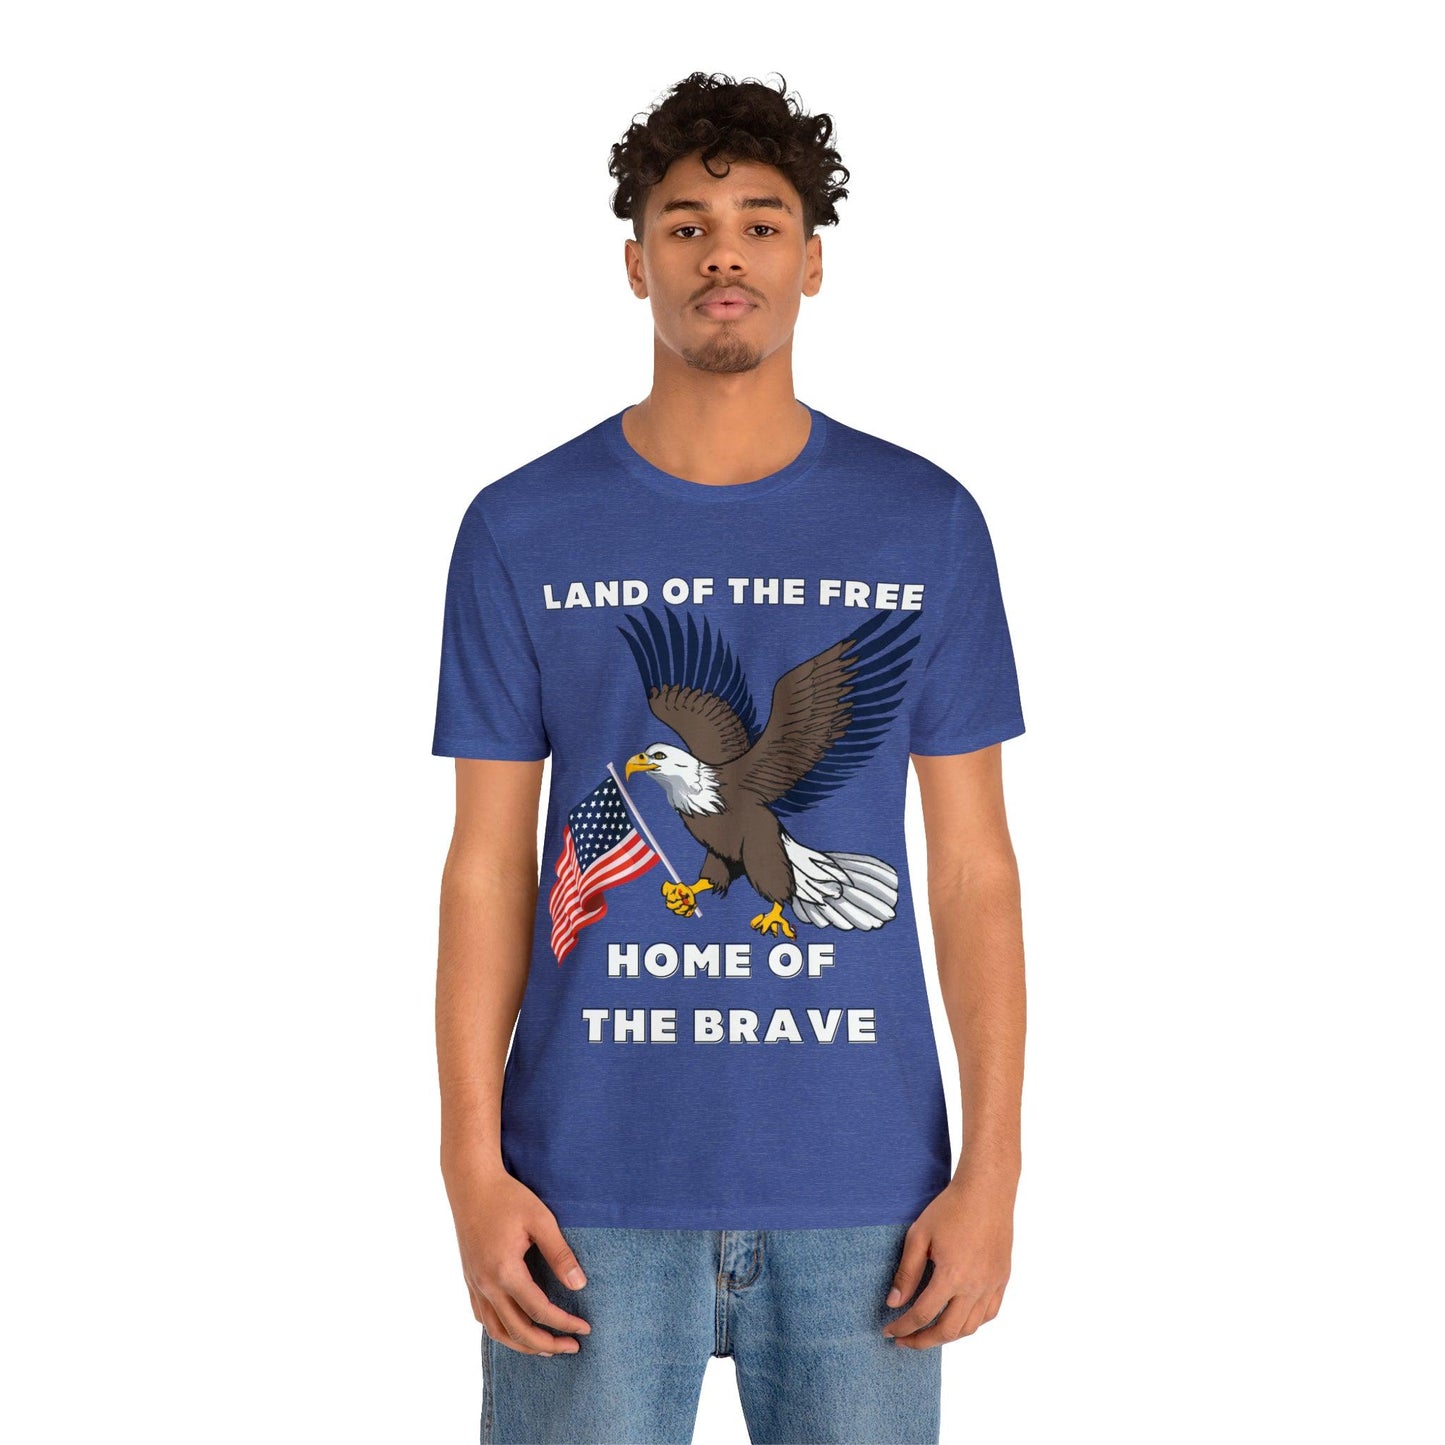 Land of the Free, Home of the Brave: Celebrate Independence Day with Patriotic Shirts - Freedom, Fireworks, and More - Giftsmojo